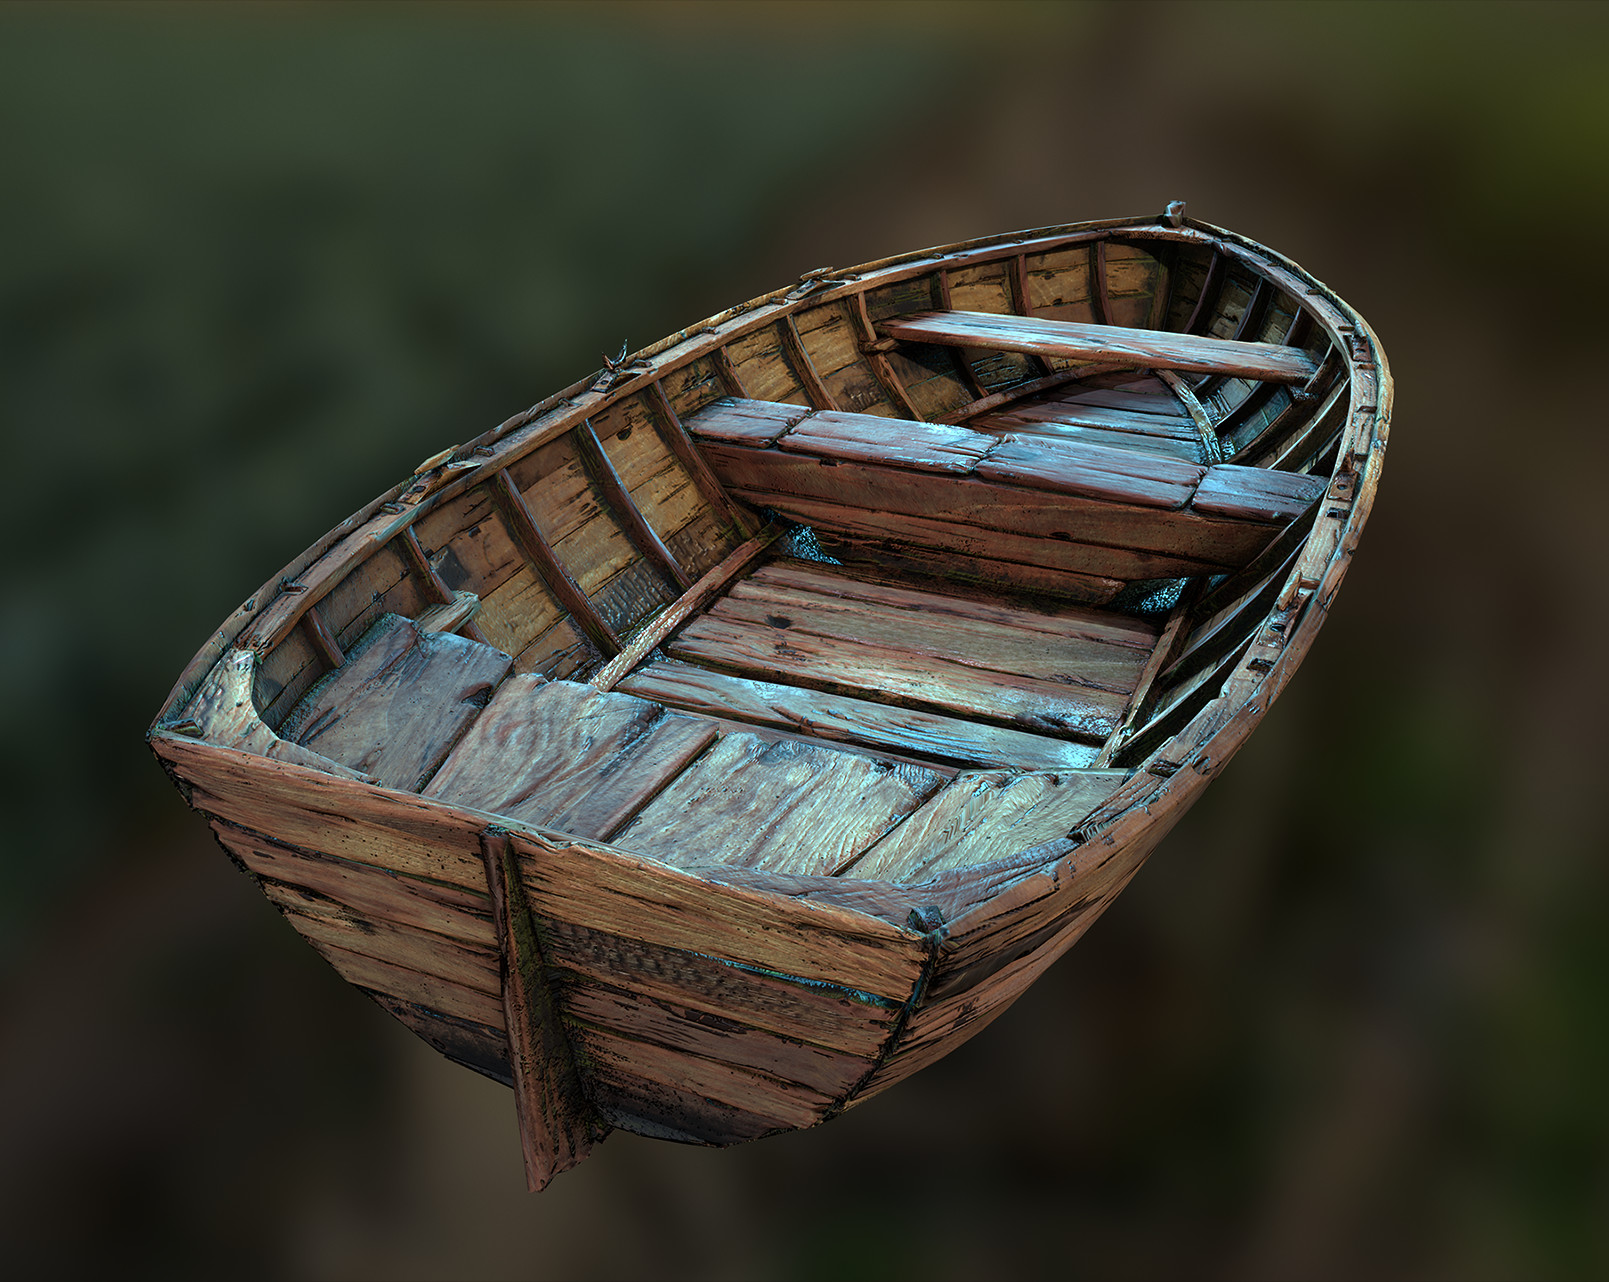 Free photo: Old wooden boat - Boat, Land, Old - Free ...